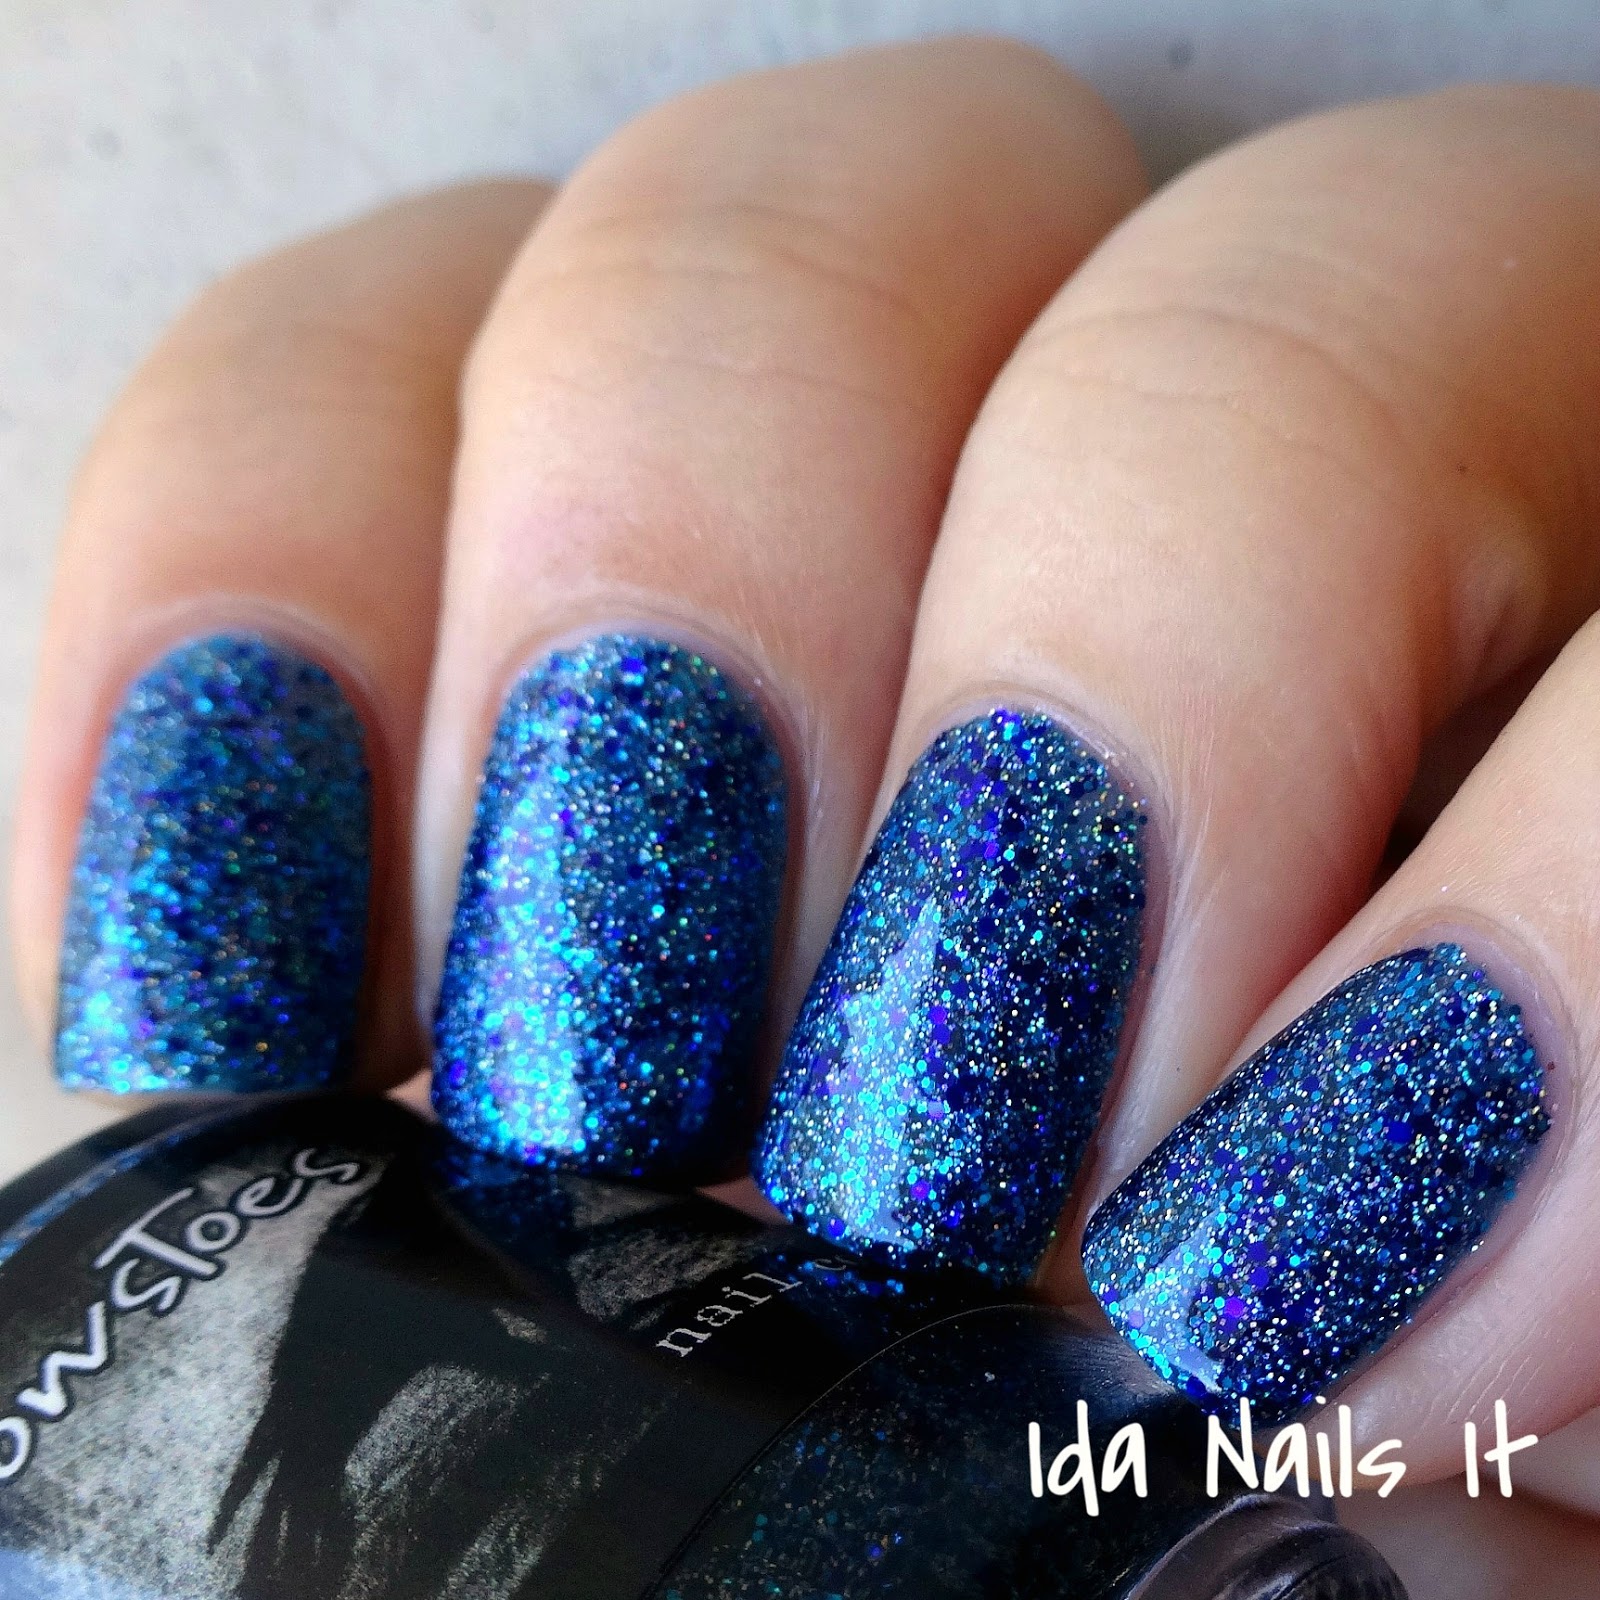 Ida Nails It: Crows Toes My Homicidal Valentine Trio: Swatches and Review